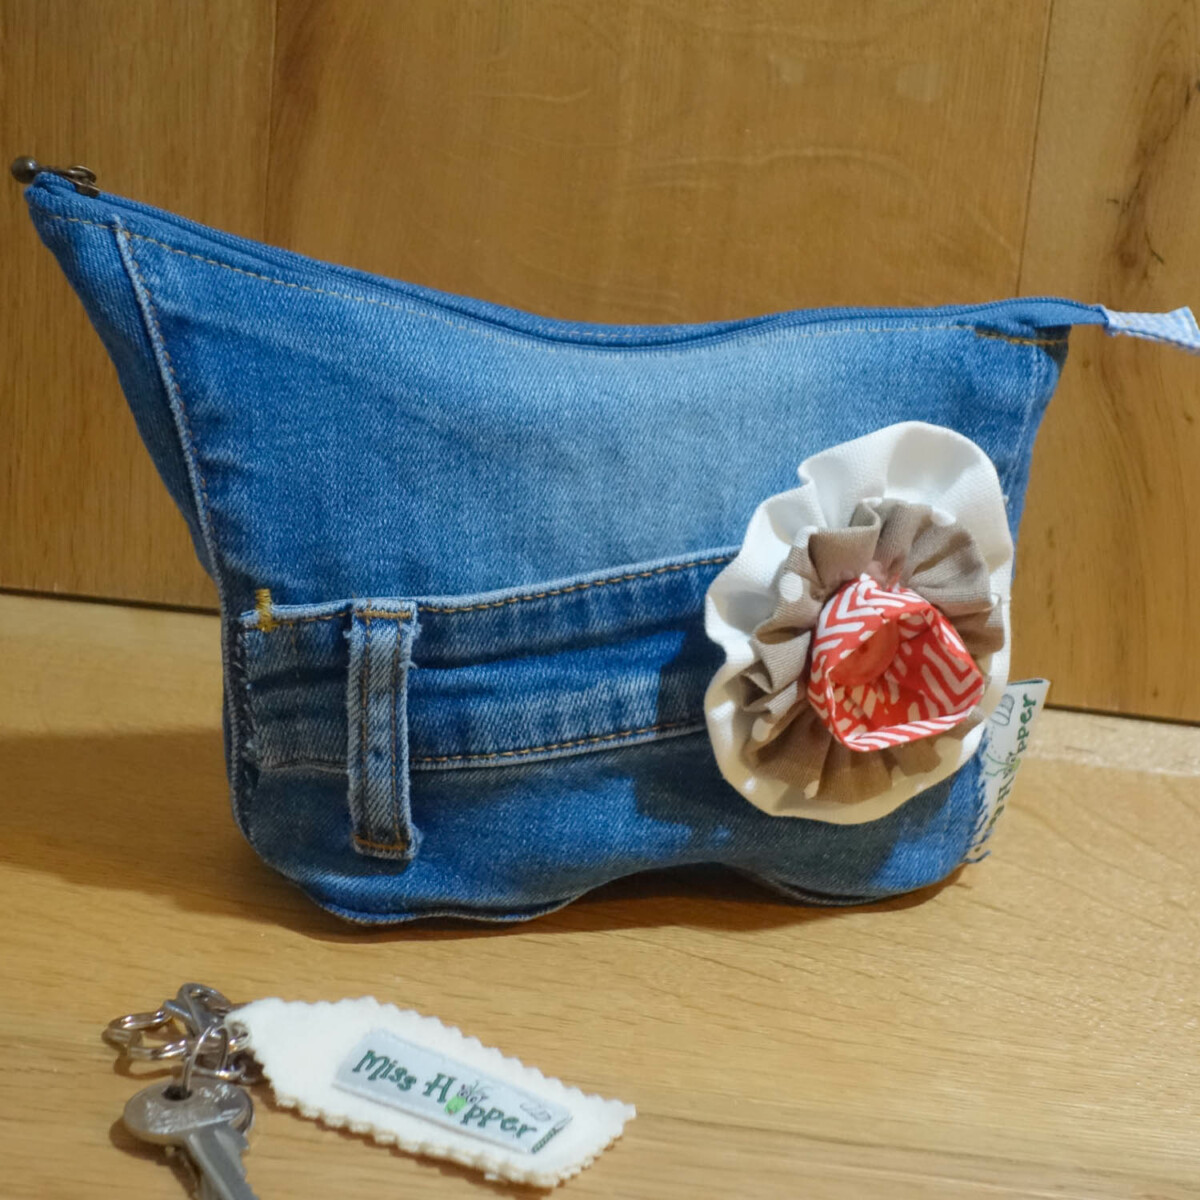 Upcycling Clutch / Utensilientasche Jeans